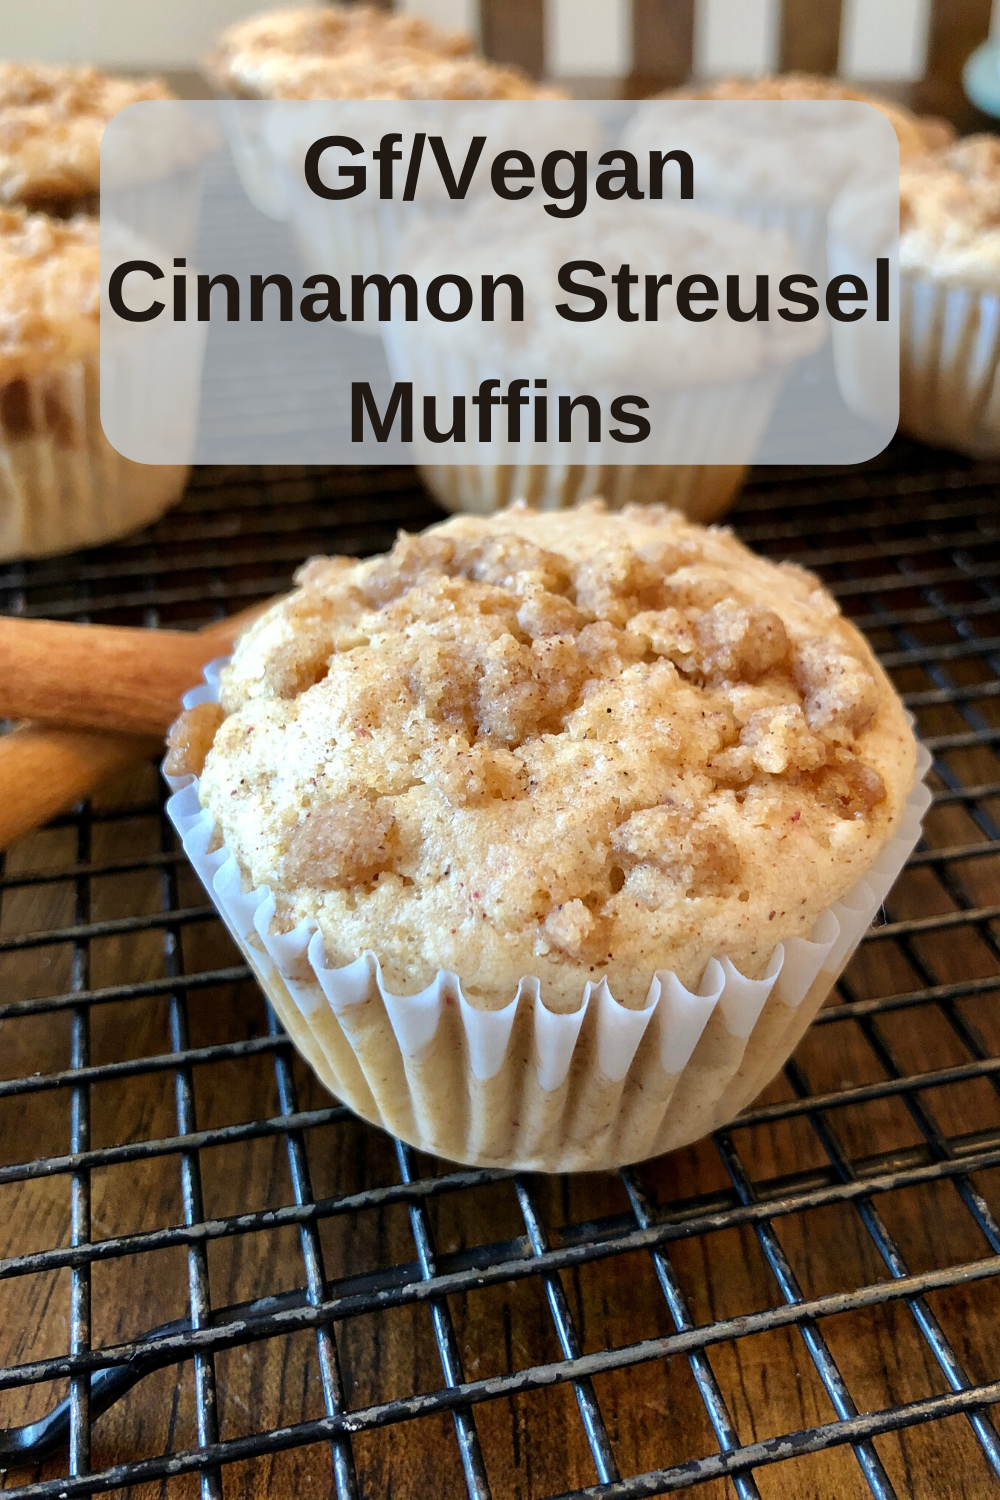 You are currently viewing Cinnamon Streusel Muffin Recipe, Gluten-Free & Vegan